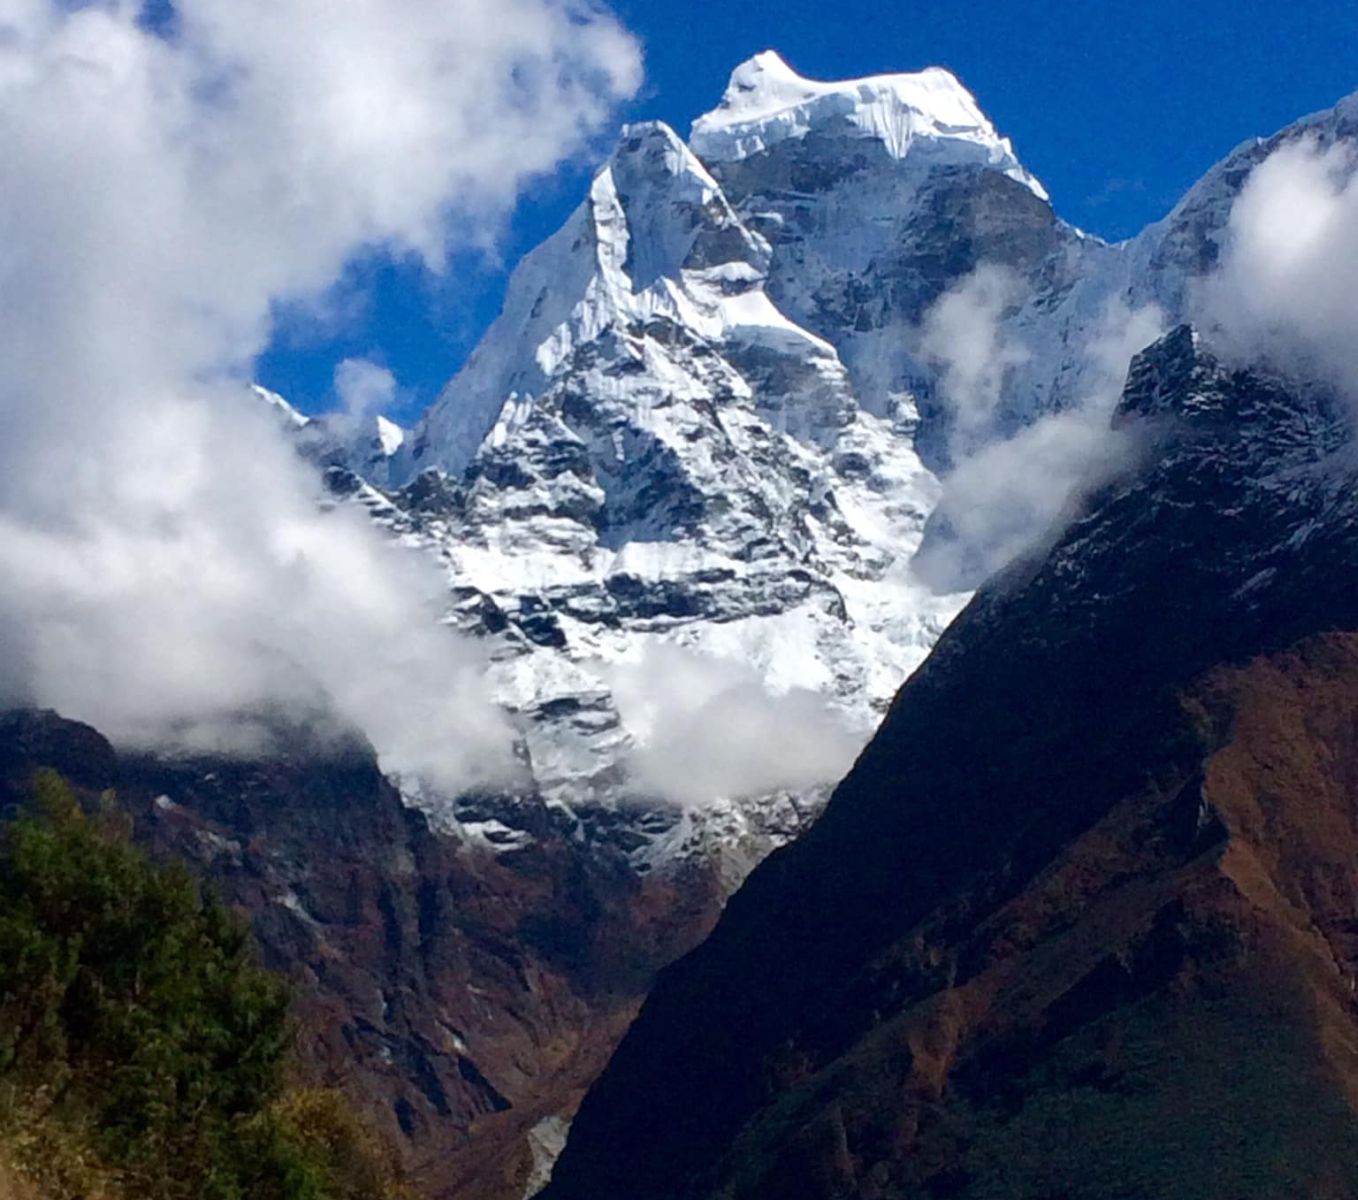 Mount Kang Taiga on route from Namche Bazaar to Tyangboche